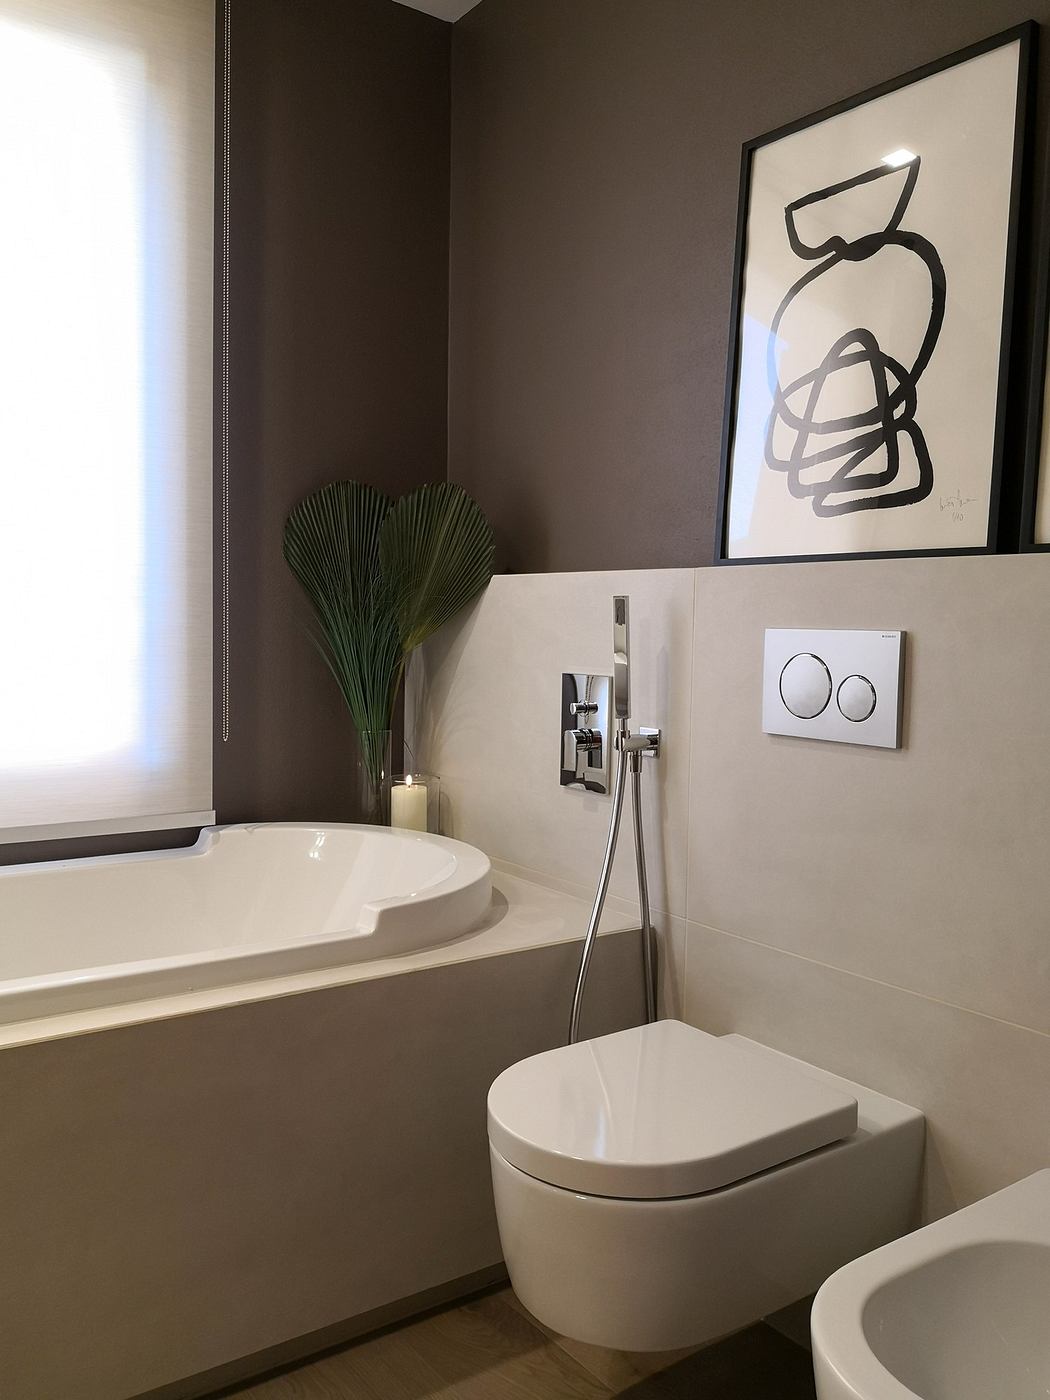 Contemporary bathroom with a sleek white bathtub, wall-mounted toilet, and abstract art